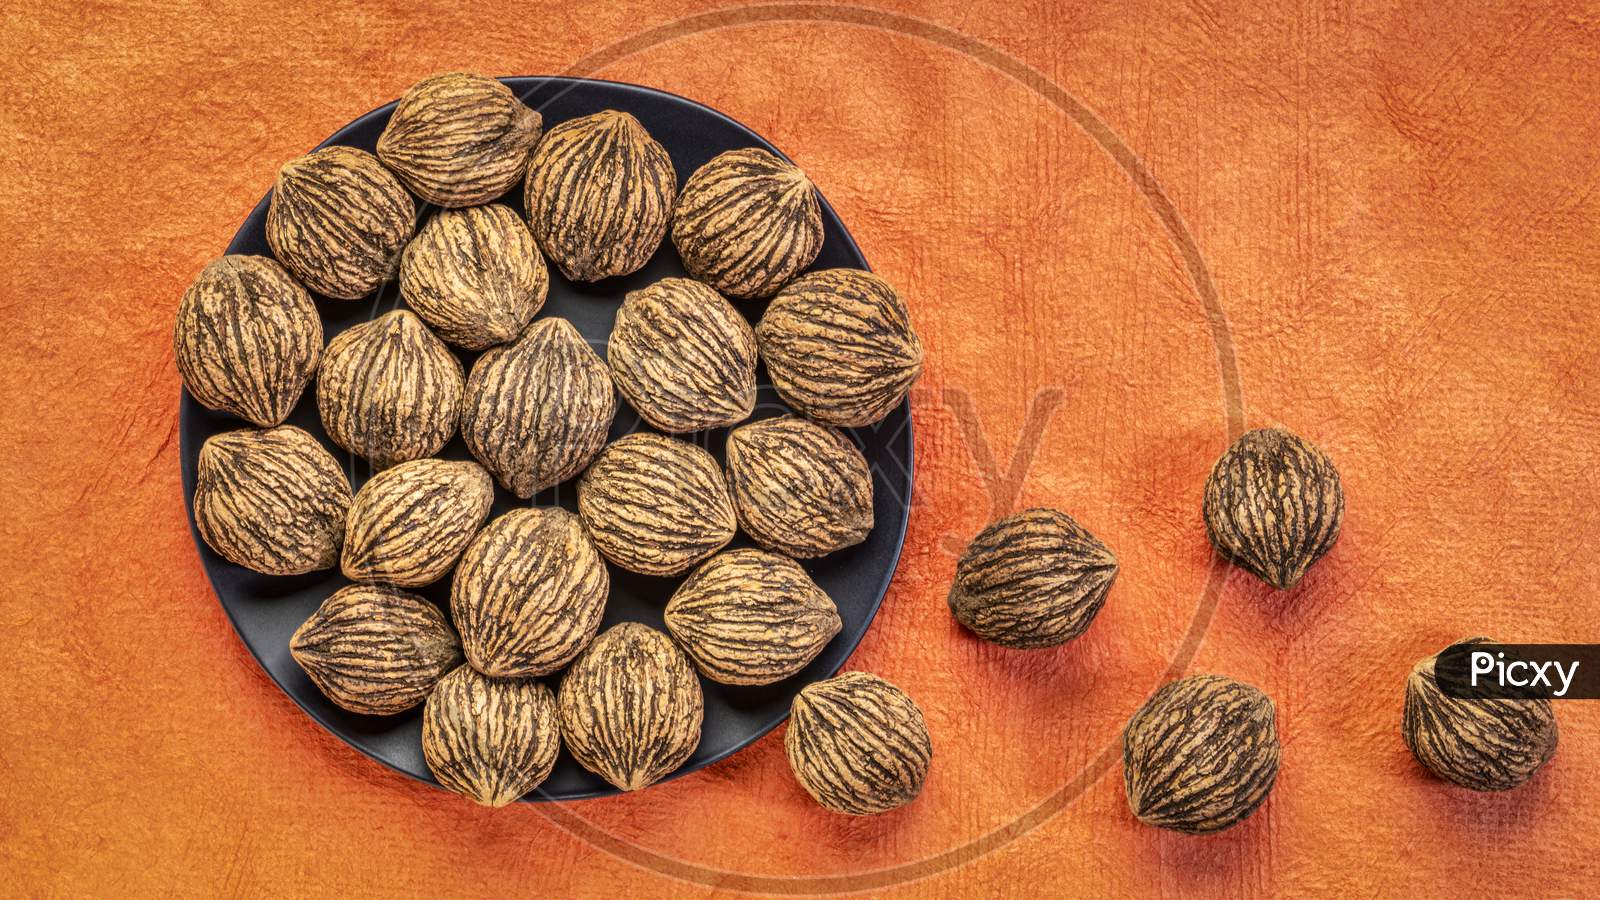 Black Walnuts On A Black Plate And Orange Textured Paper Background With A Copy Space